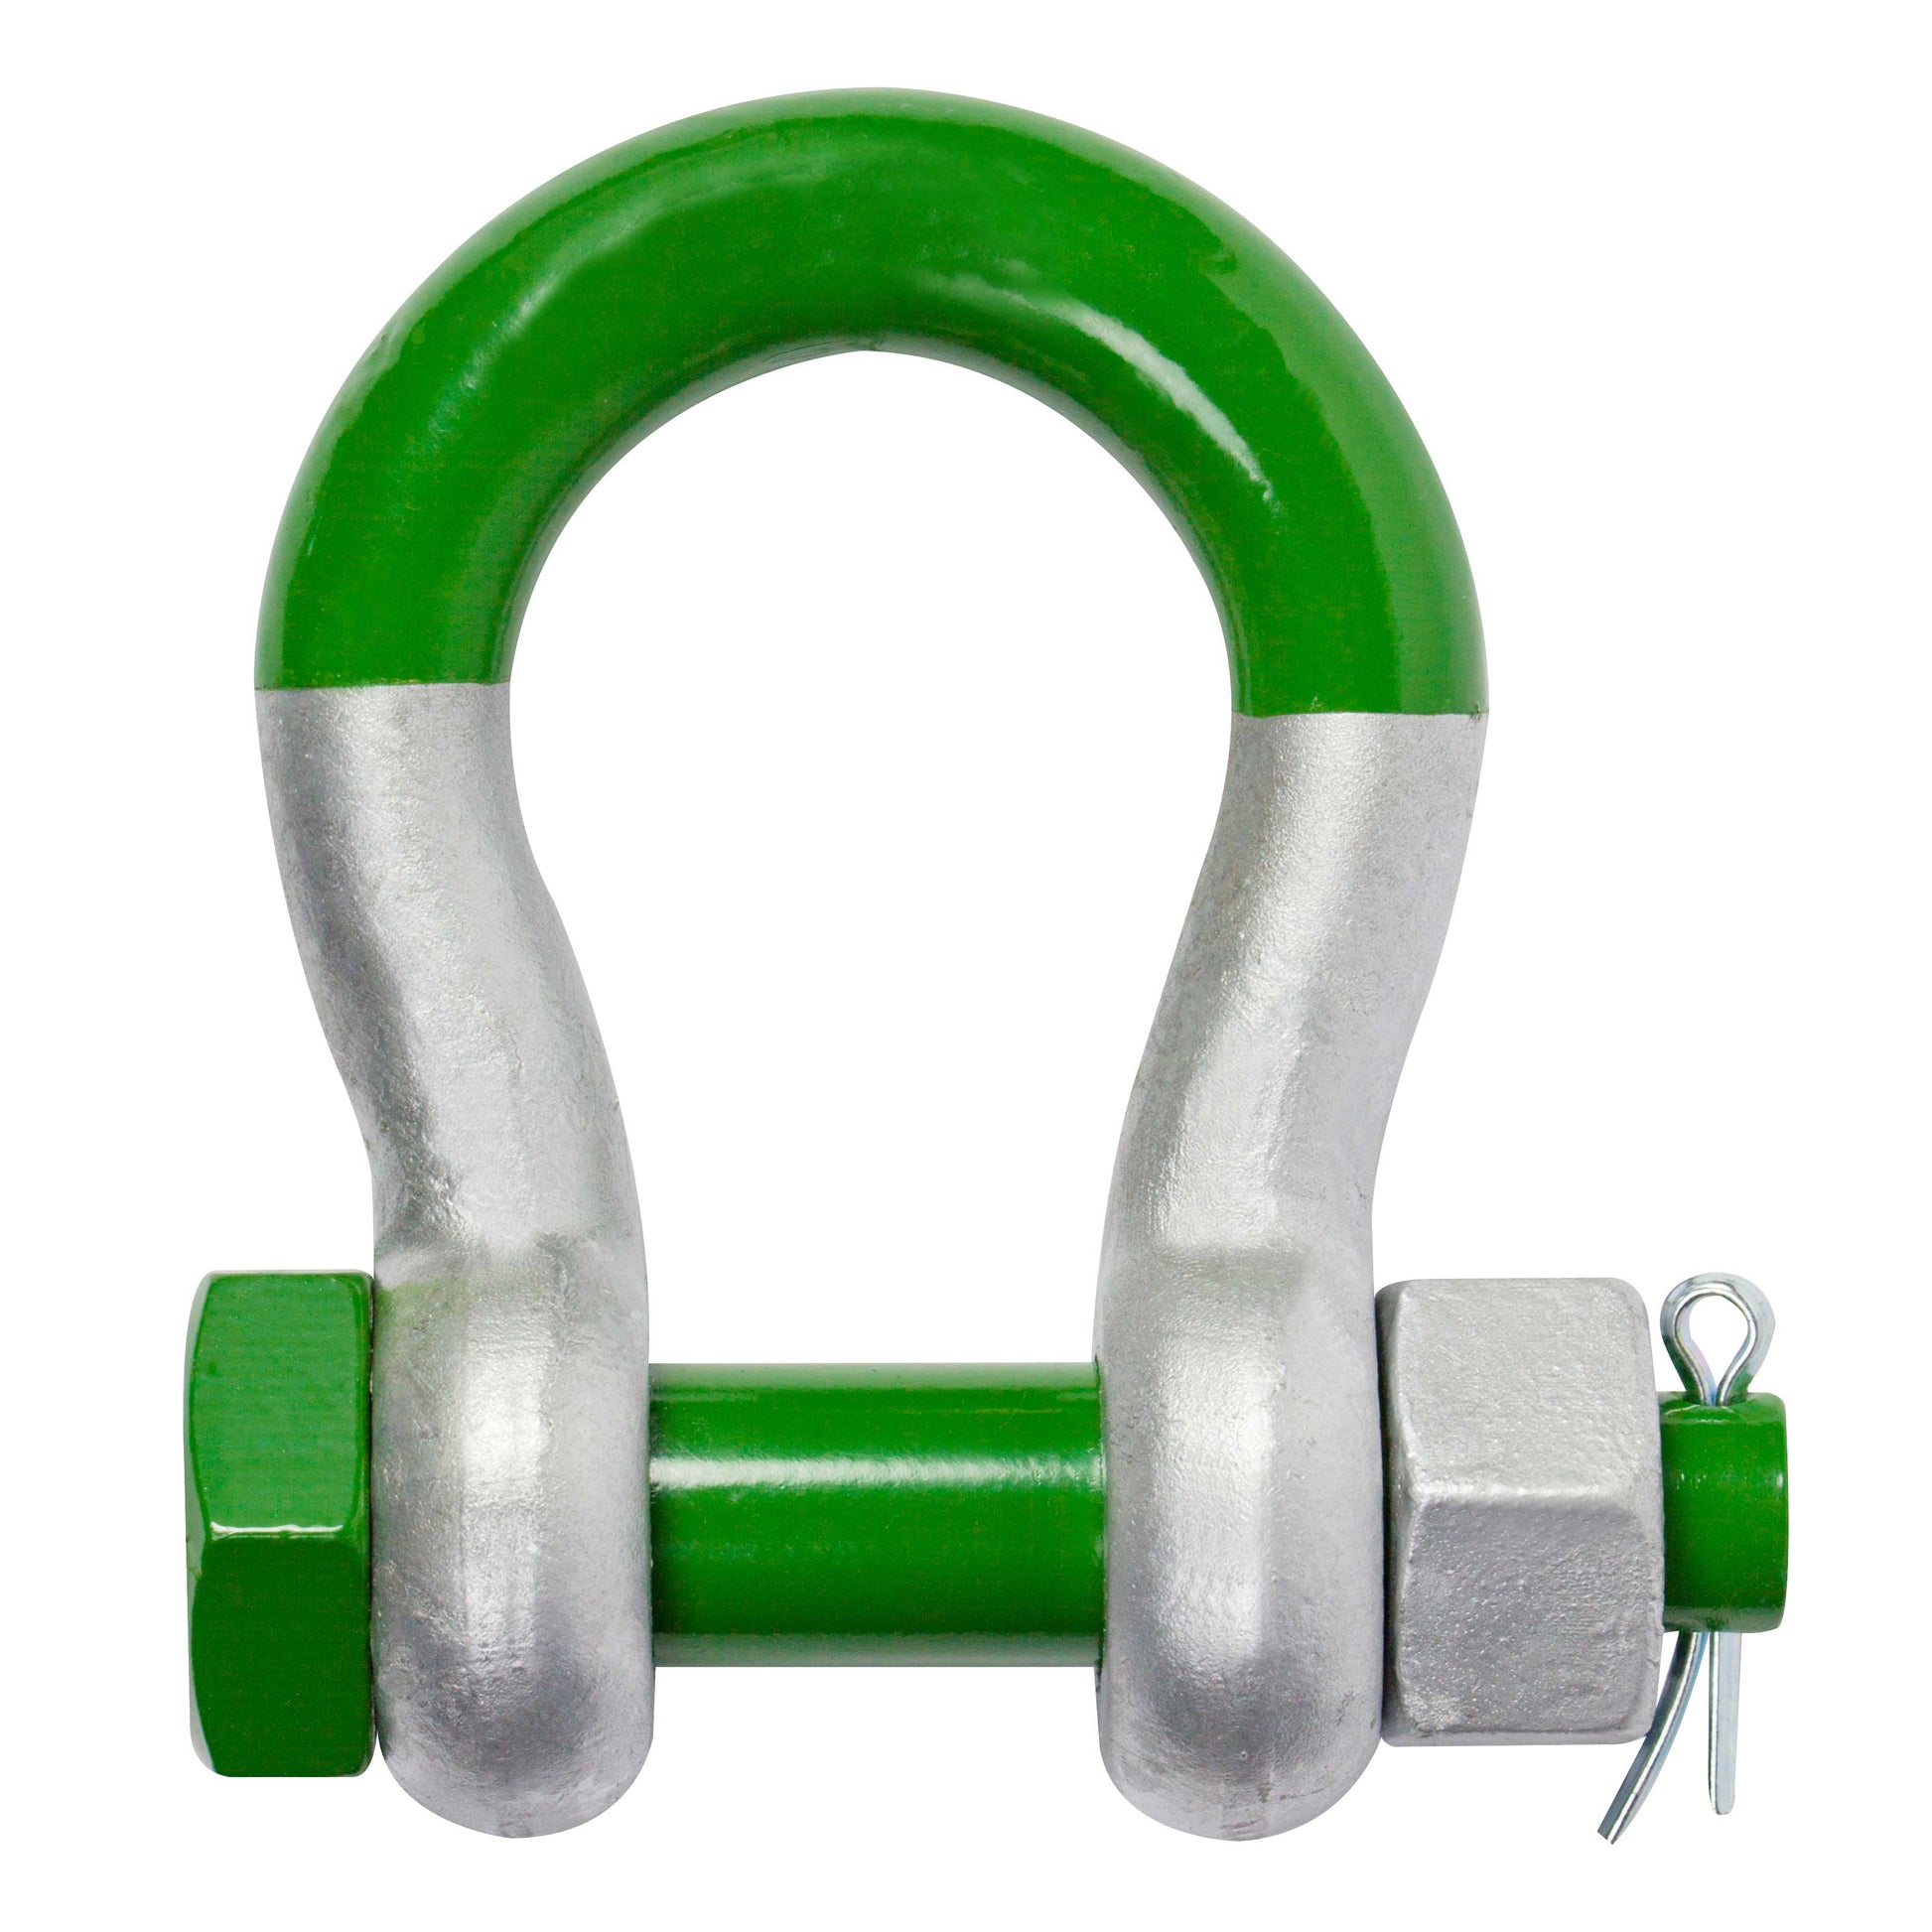 1-3/8" Van Beest Green Pin® Bolt Type Anchor Super Shackle | G-5263 - 21 Ton primary image